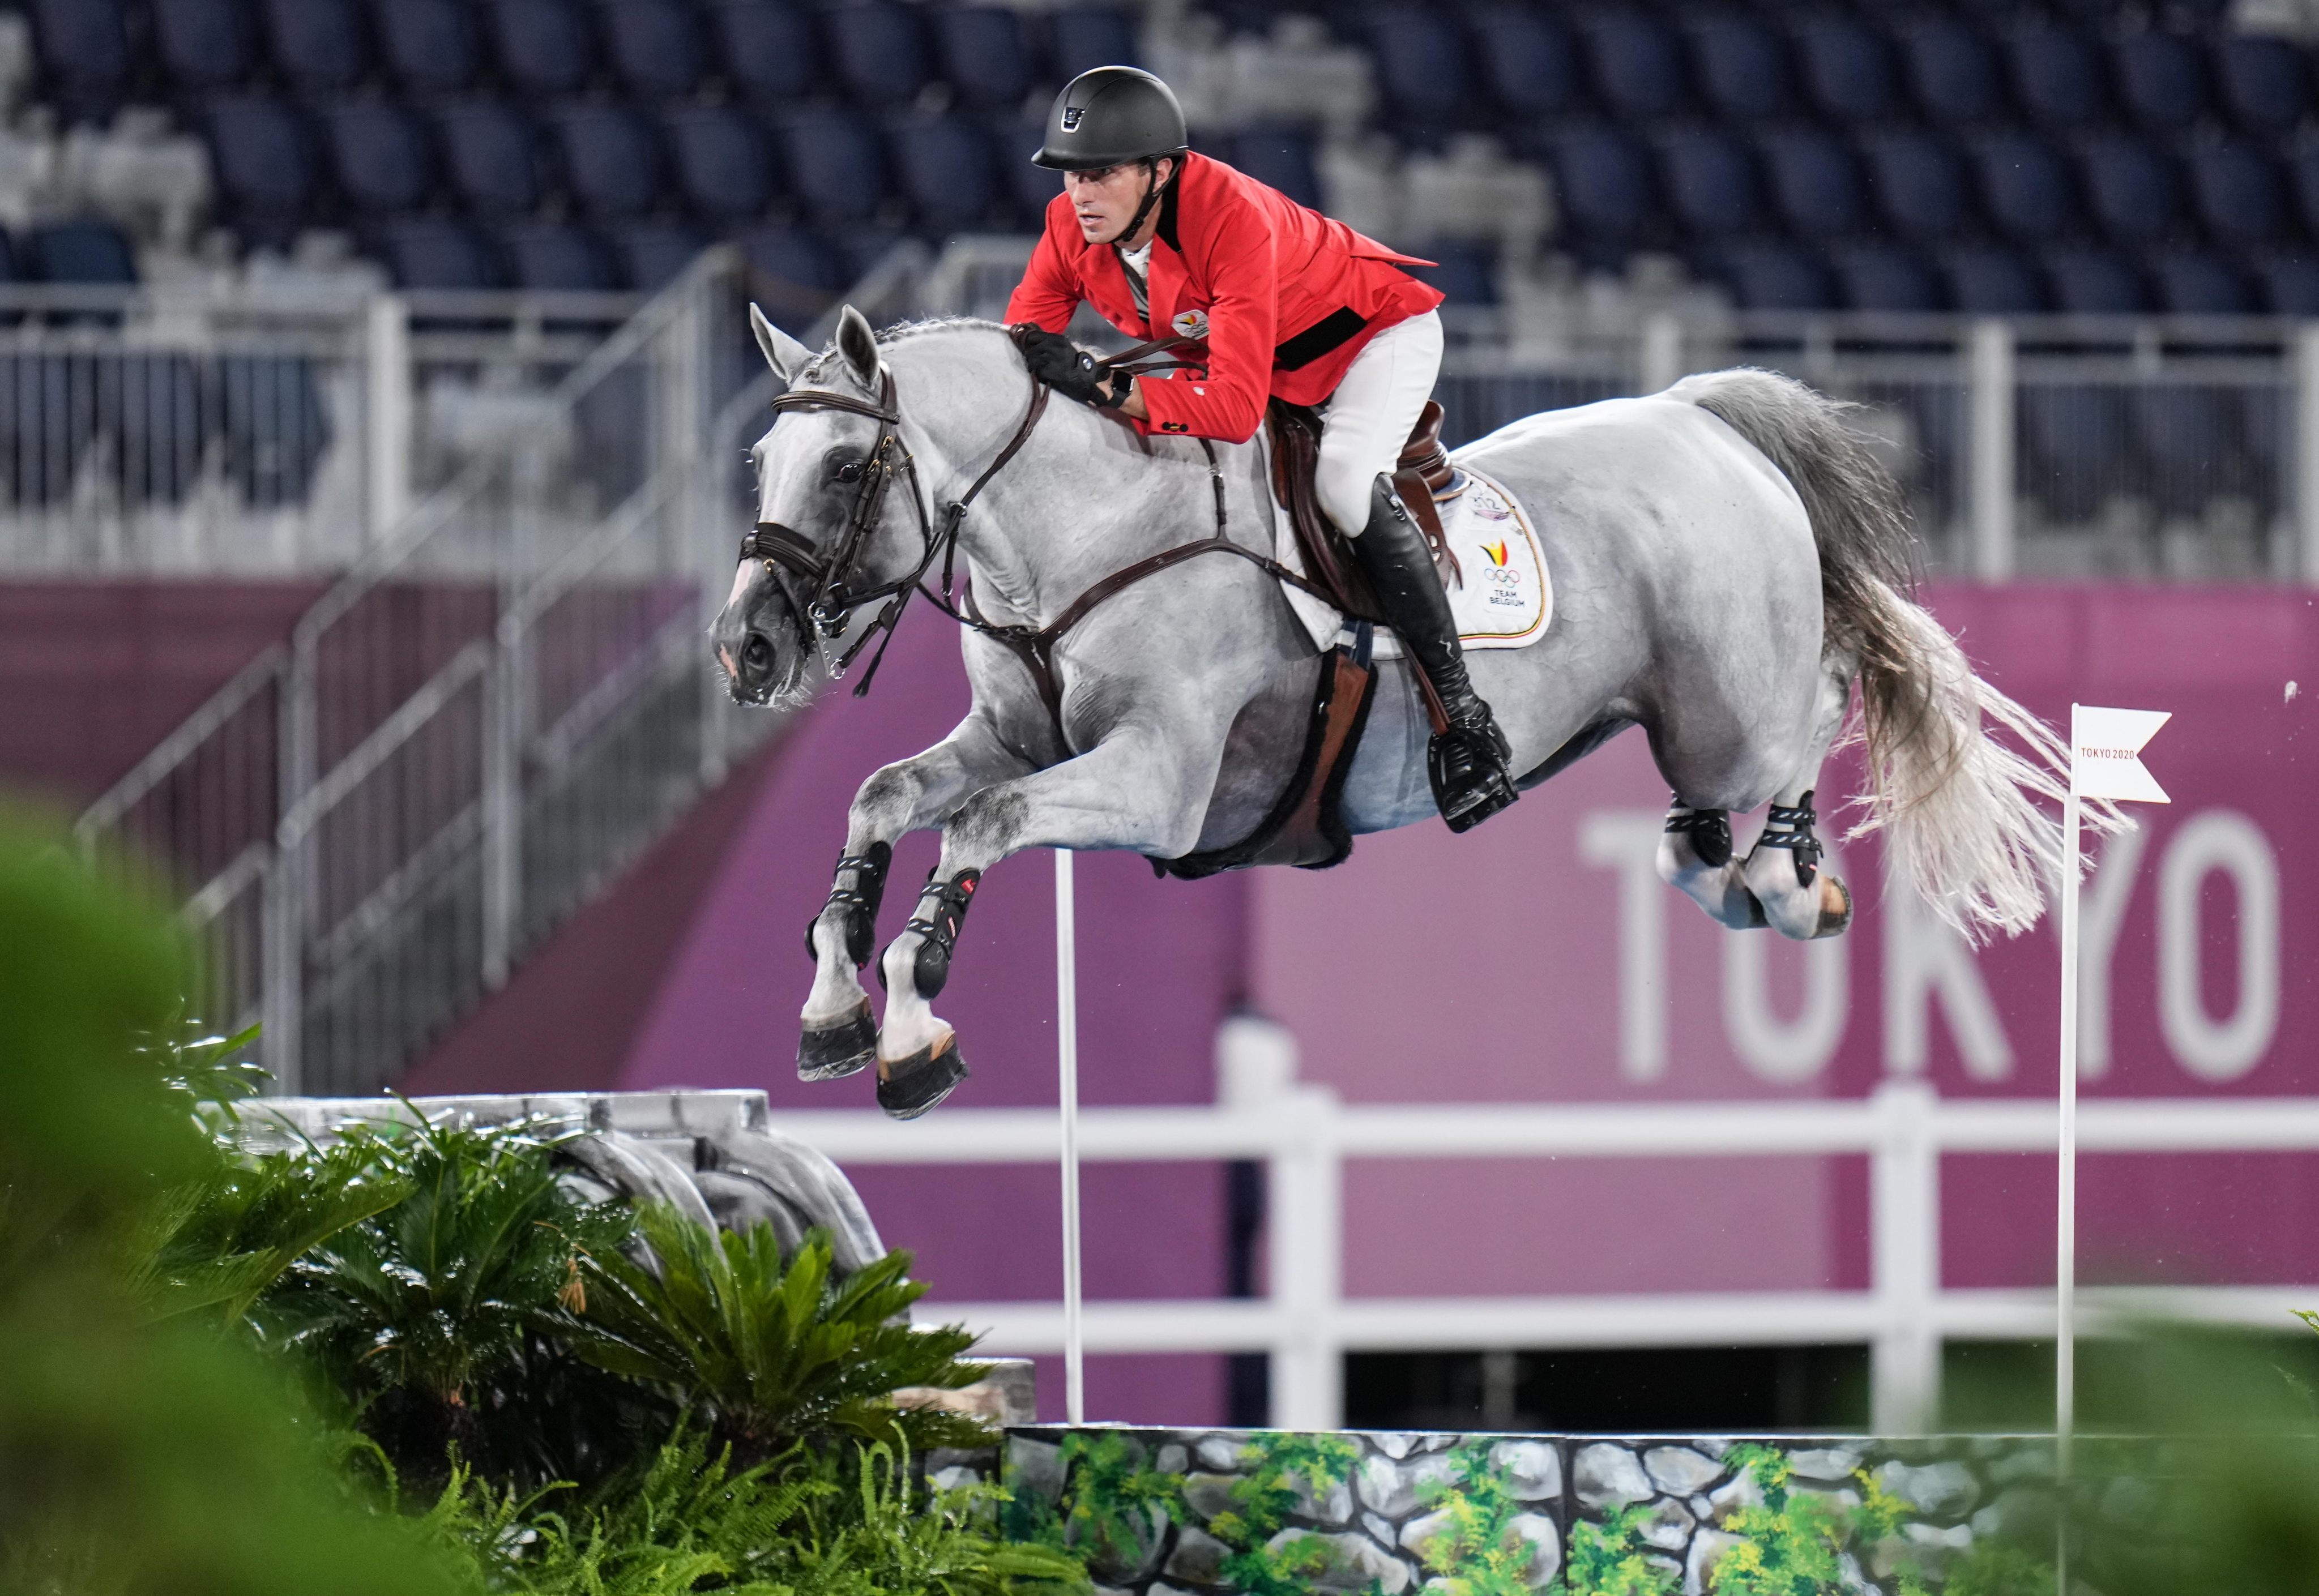 Gregory Wathelet of Belgium, during the show jumping team final at the Tokyo 2020 Olympic Games: one of the equestrian sports that are elite in nature. Photo: Xinhua